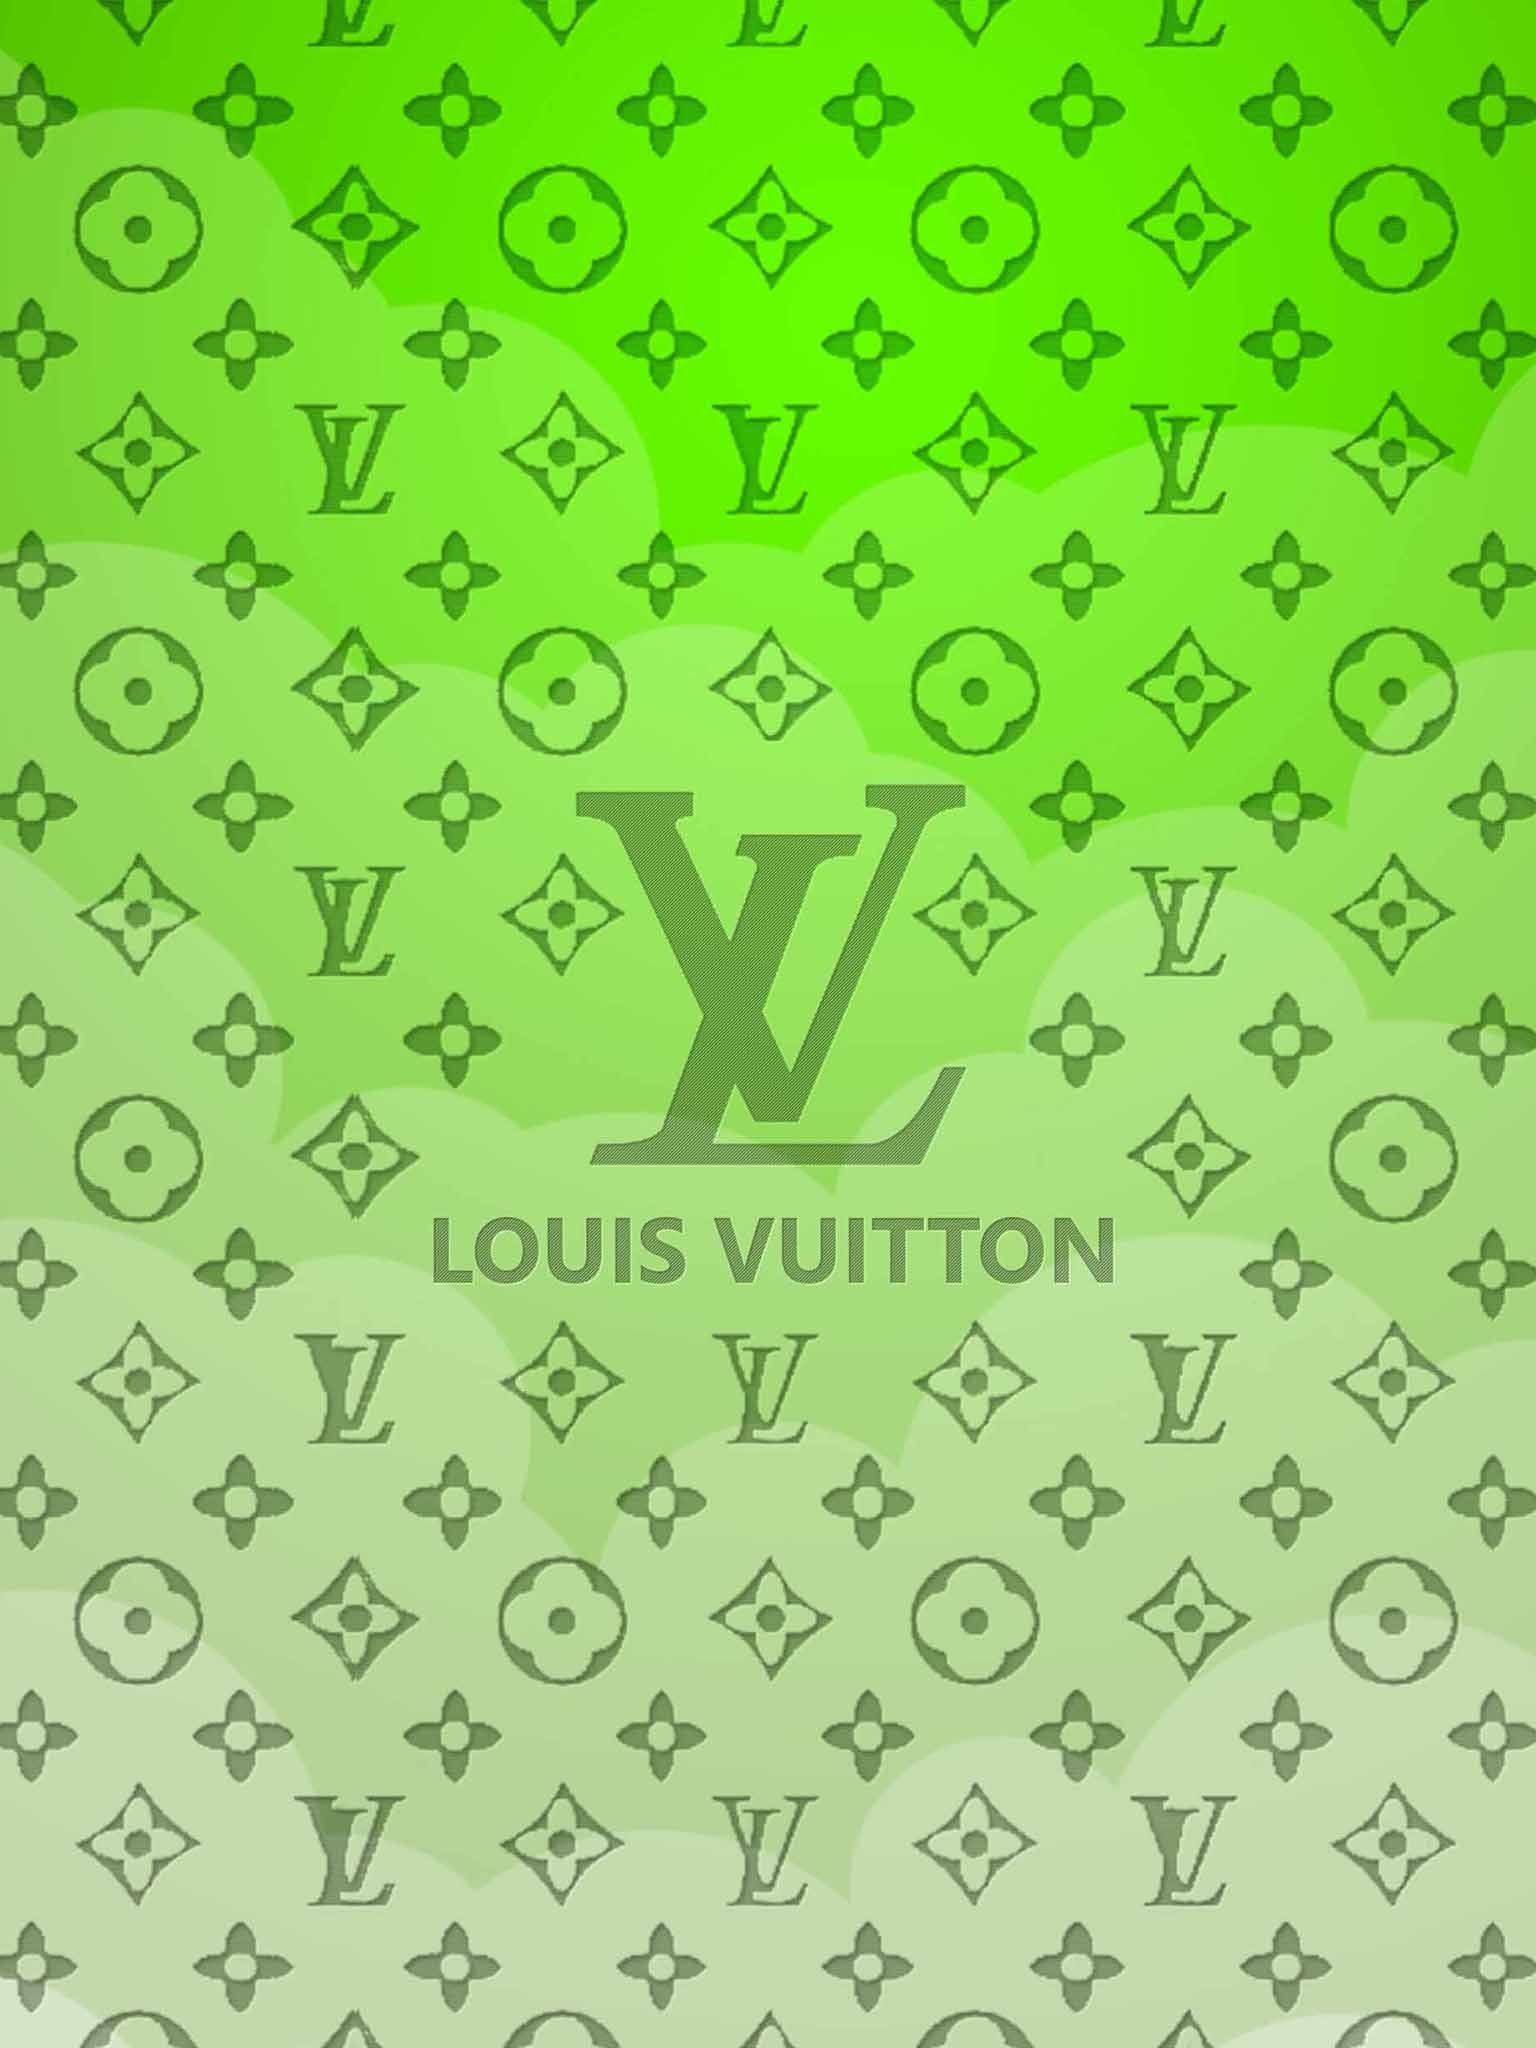 Download wallpapers Louis Vuitton pink logo, 4k, pink neon lights,  creative, pink abstract background, Louis Vuitton logo, fashion brands, Louis  Vuitton for desktop with resolution 1024x1024. High Quality HD pictures  wallpapers